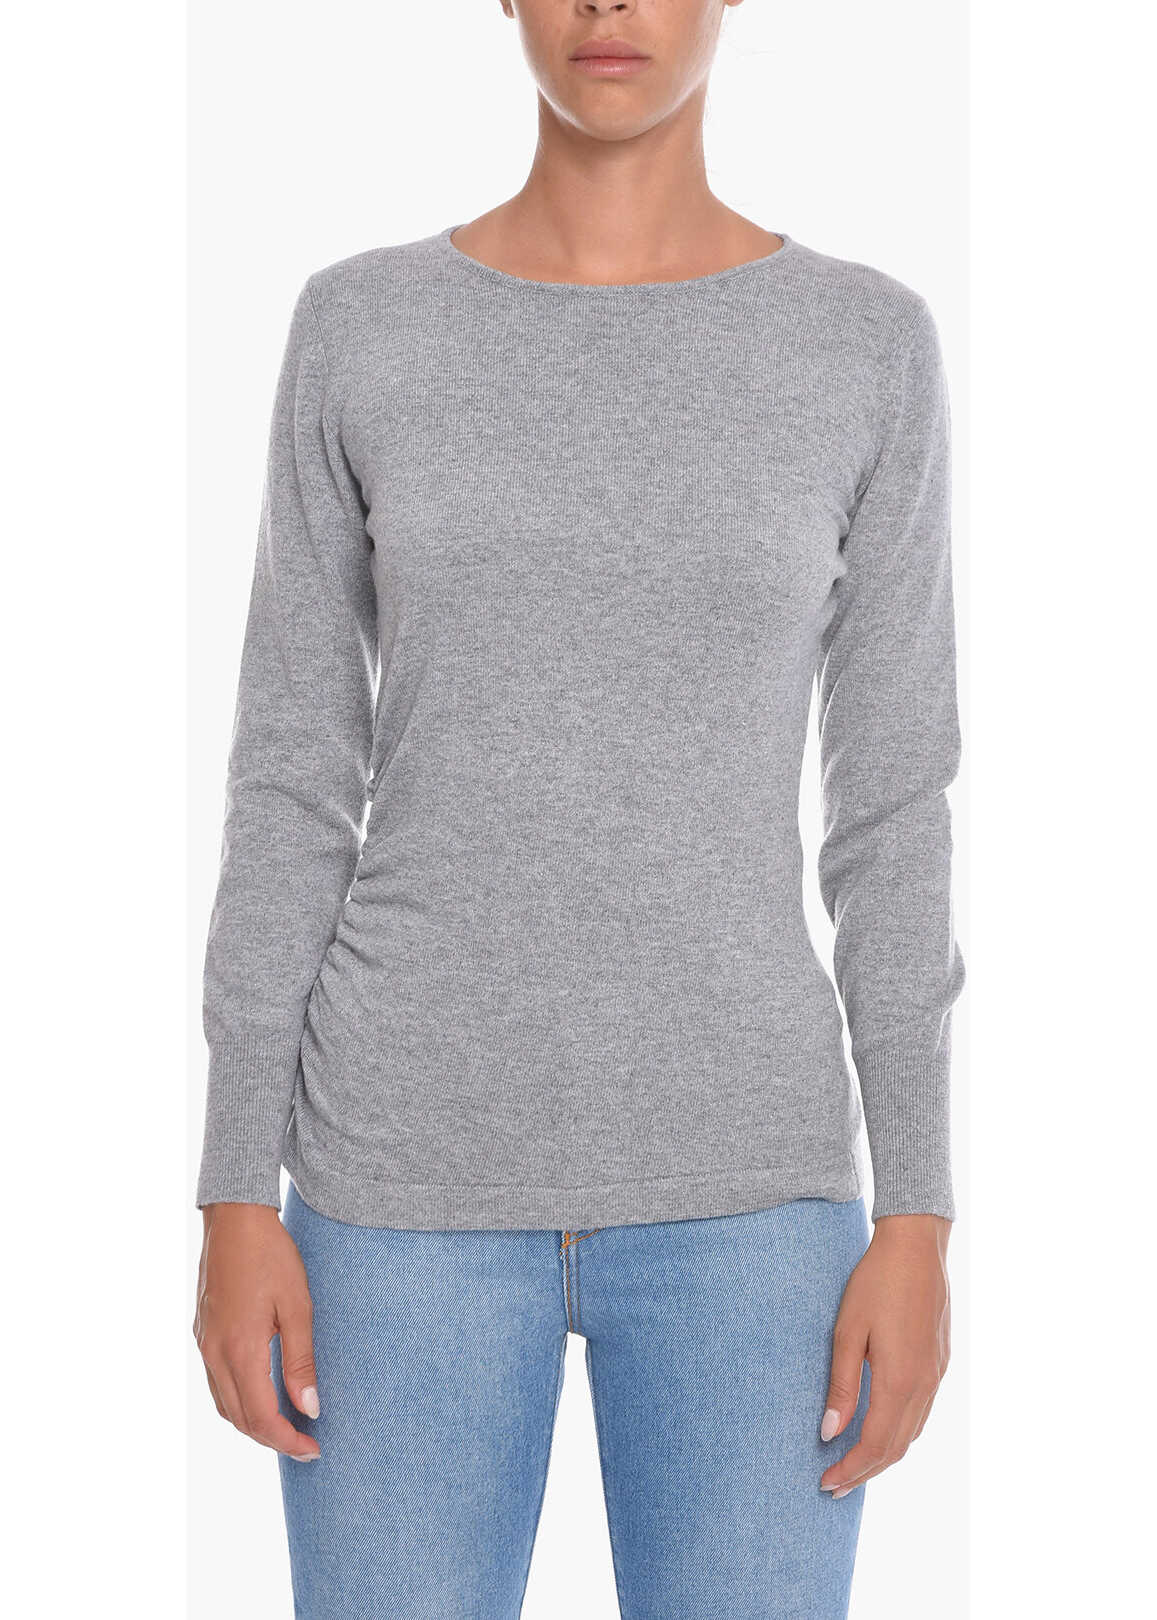 Fabiana Filippi Cashmere Crewneck Sweater With Ruched Detailing Gray